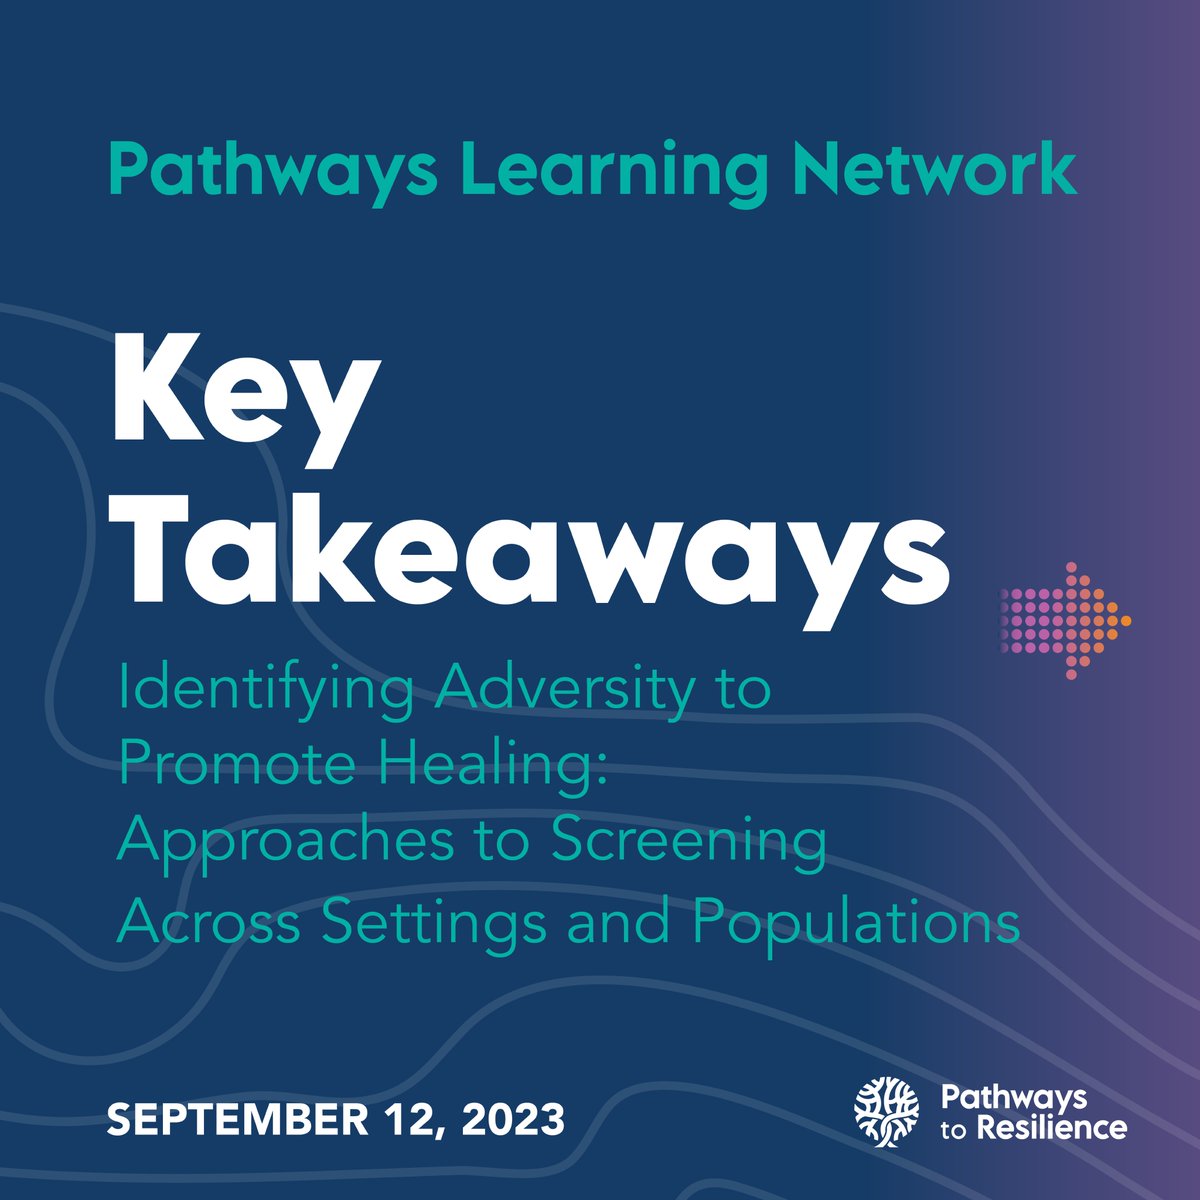 Screening for #adversity can help health care & social service providers better support the populations they serve.

Learn more in our new Key Takeaways blog: pathways-us.org/2023/11/02/ide…

#ChartingthePath #traumaresponsive #AdverseChildhoodExperiences